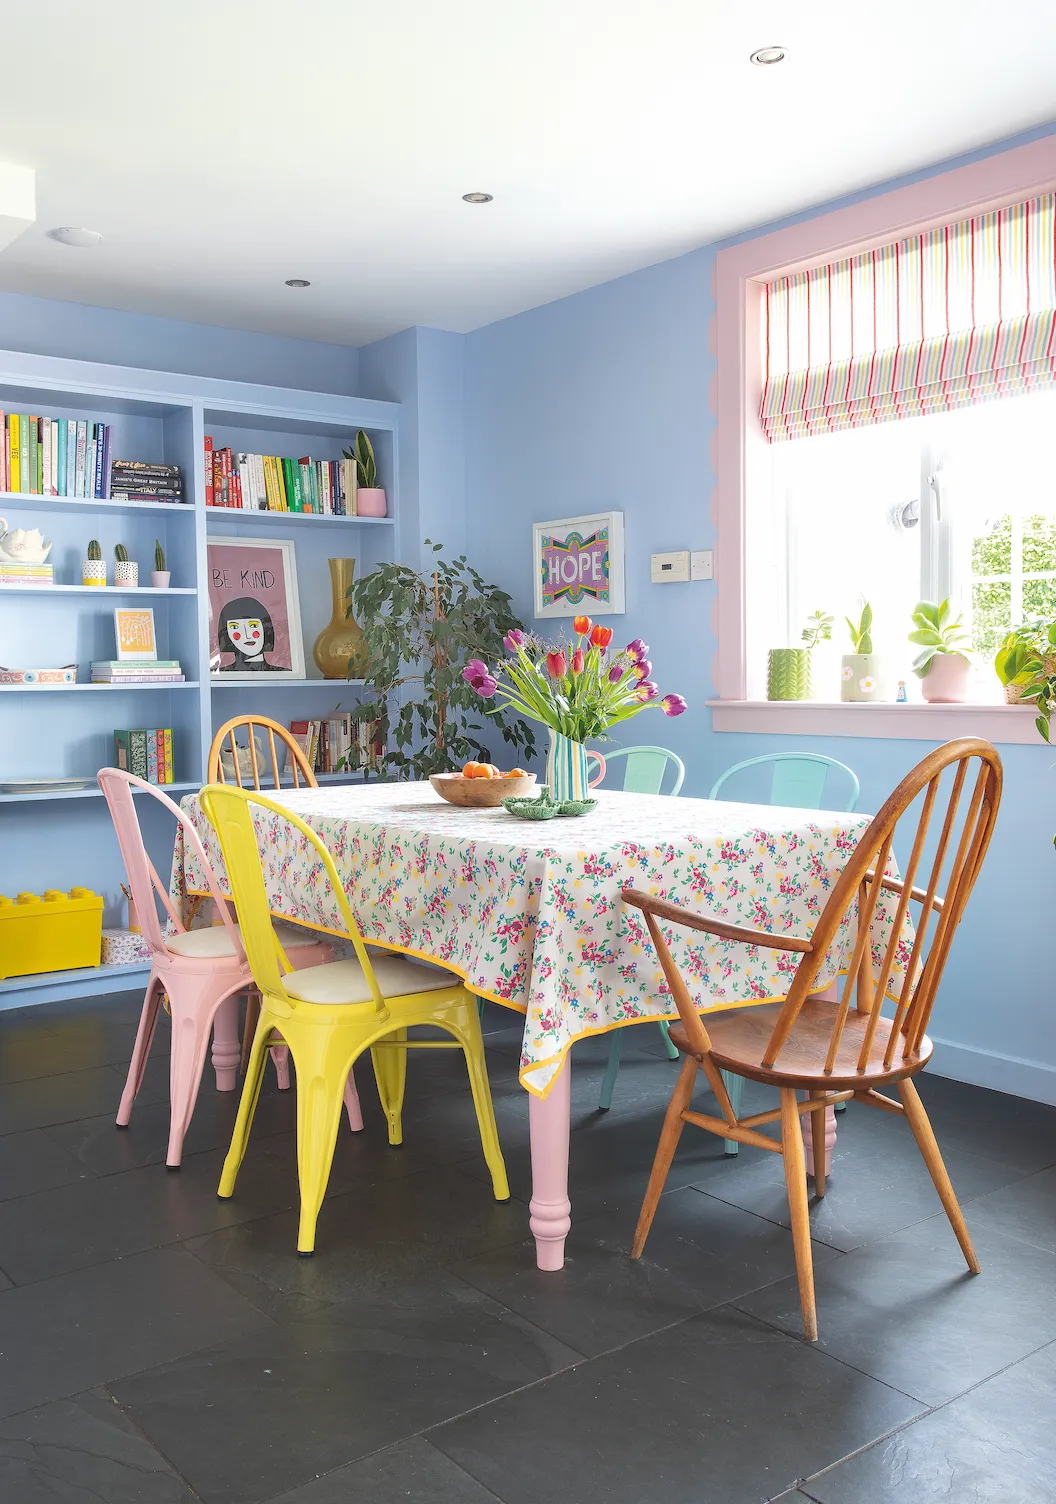 Cath Kidston patterns and flashes of mustard give a hint of warmth to the pastels, complementing the pink window frame and colourful chairs from Sklum. Heather already had the farmhouse table, which she painted pink